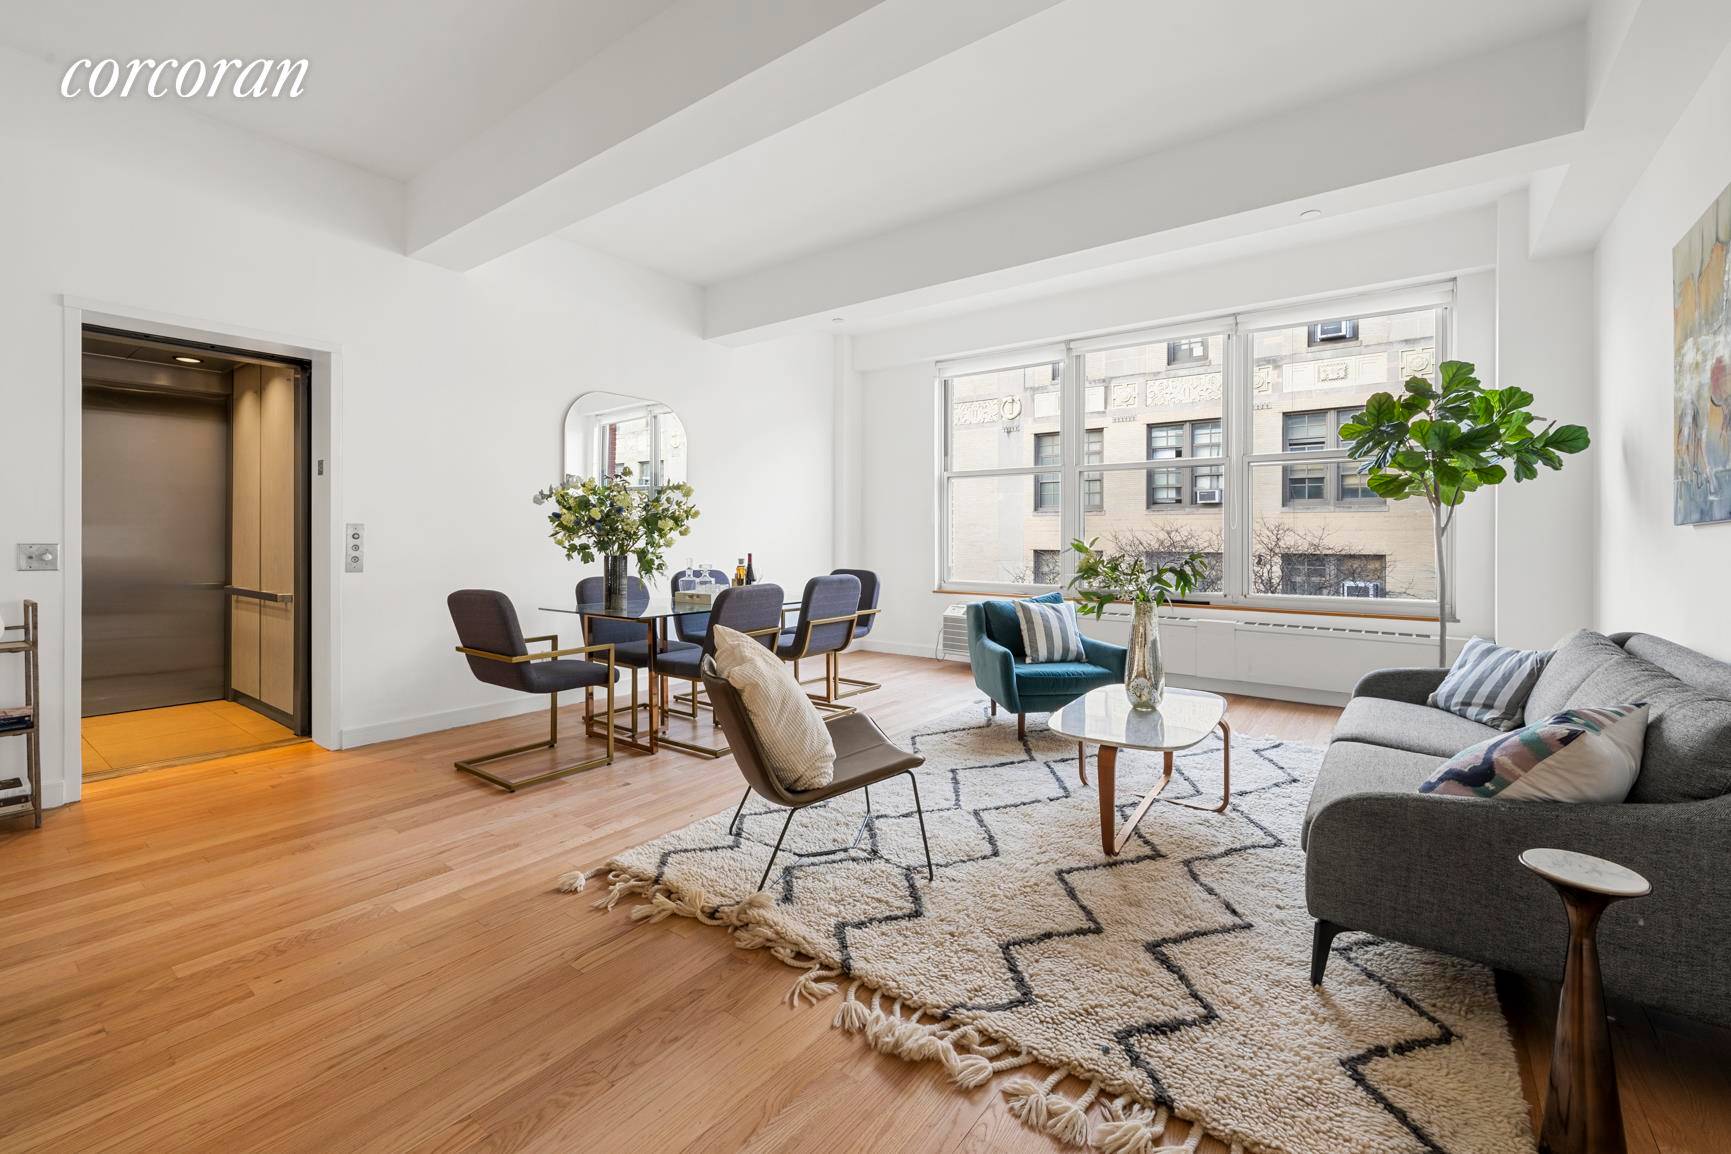 Step out from your private elevator and enter directly into this expansive, modern and lofty 2 bedroom, 2 bath condo in prime Boerum Hill.